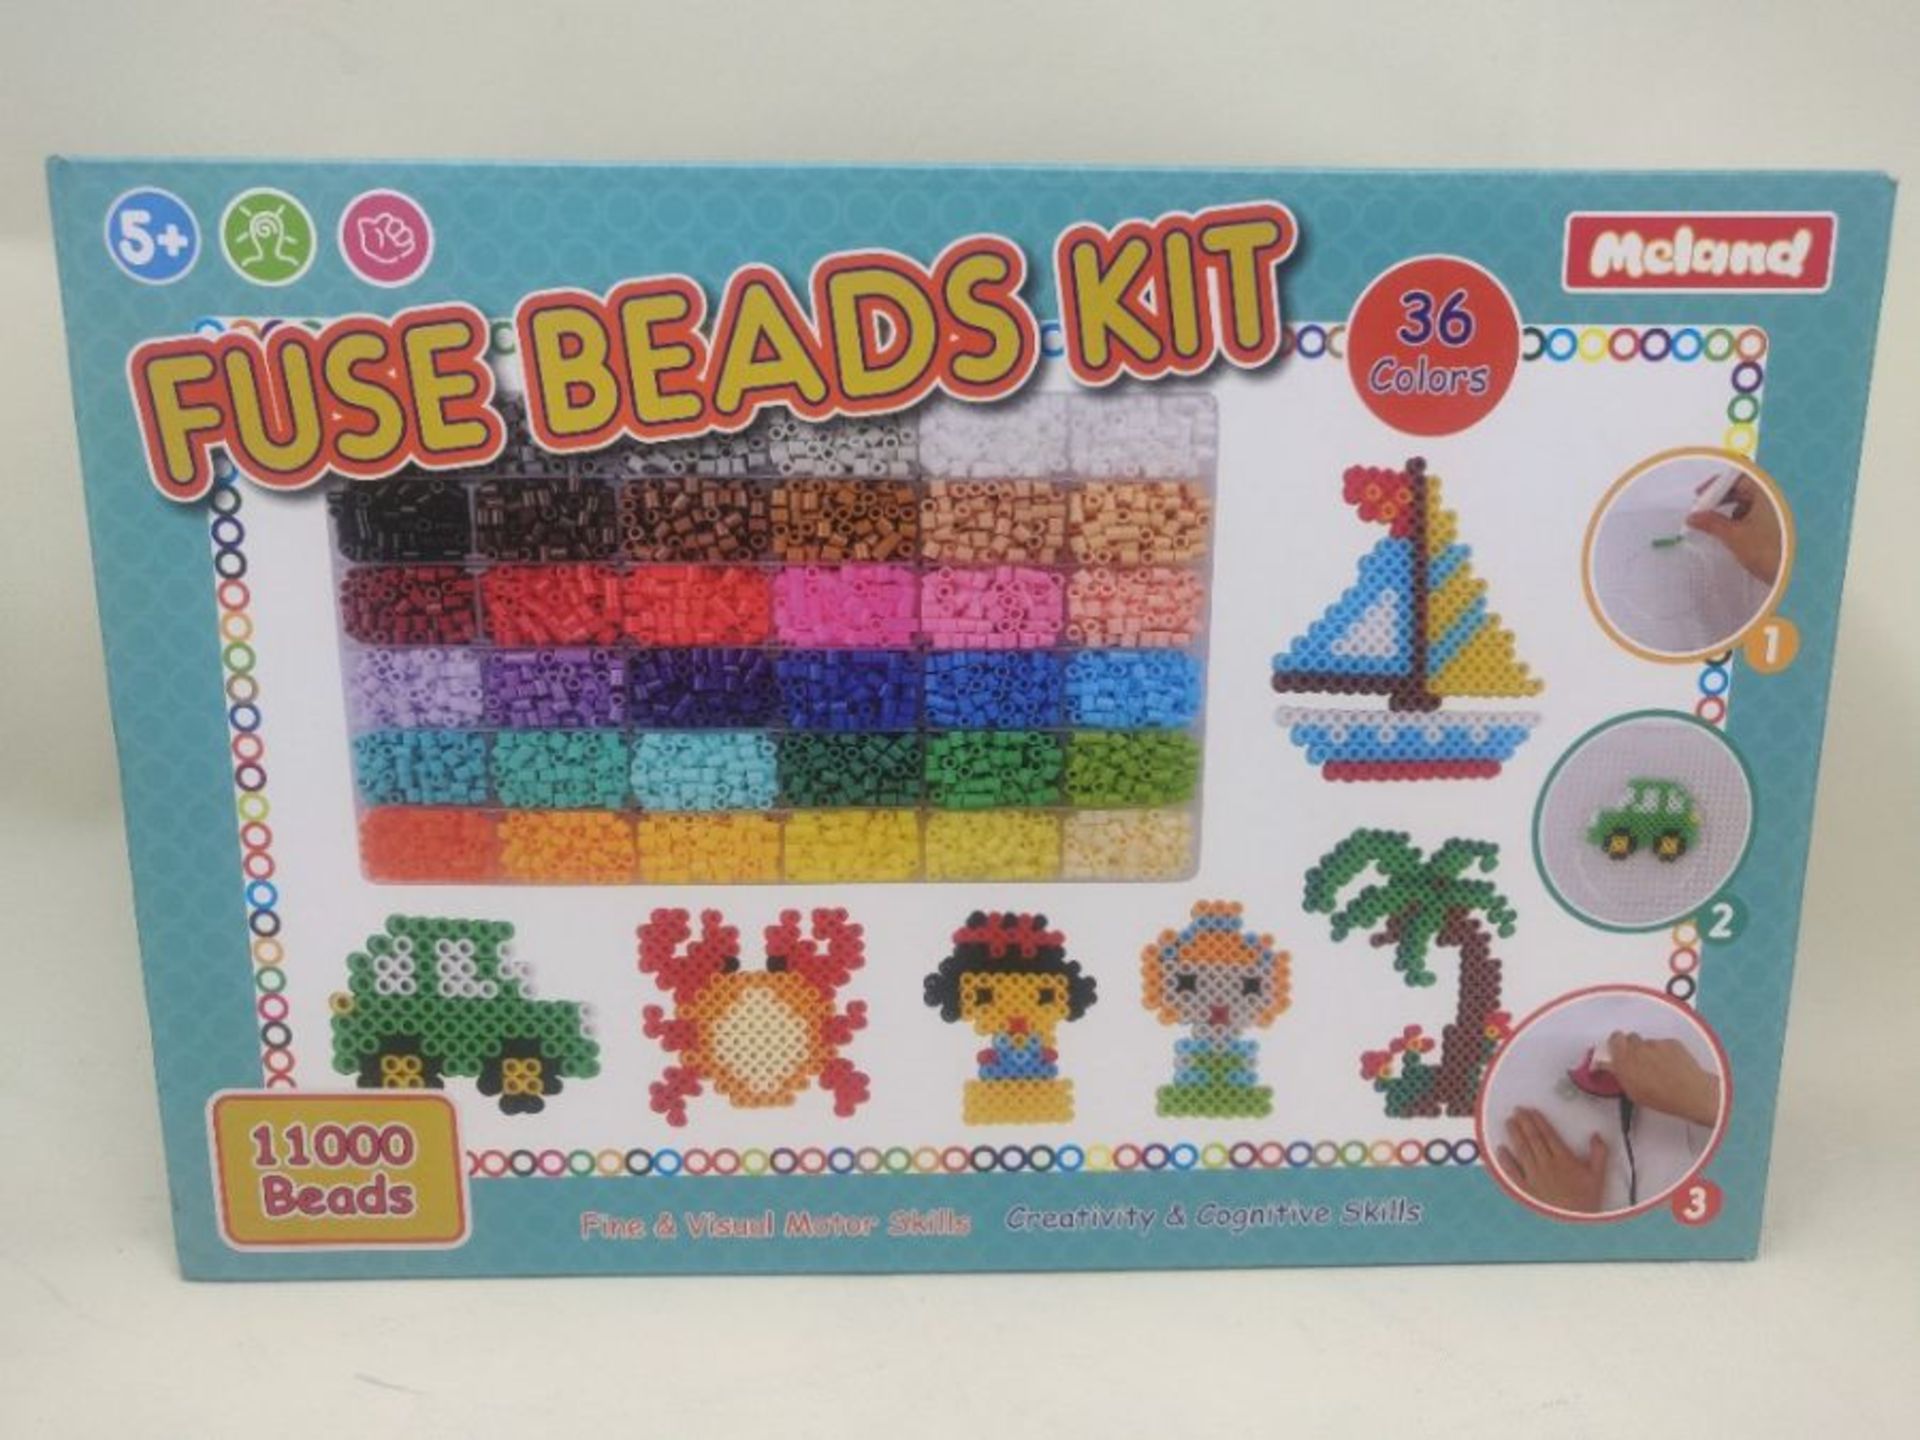 Meland Fuse Beads Kit - 11000pcs 36 Colors Iron Beads Set for Kids with 5 Pegboards, 2 - Image 2 of 3